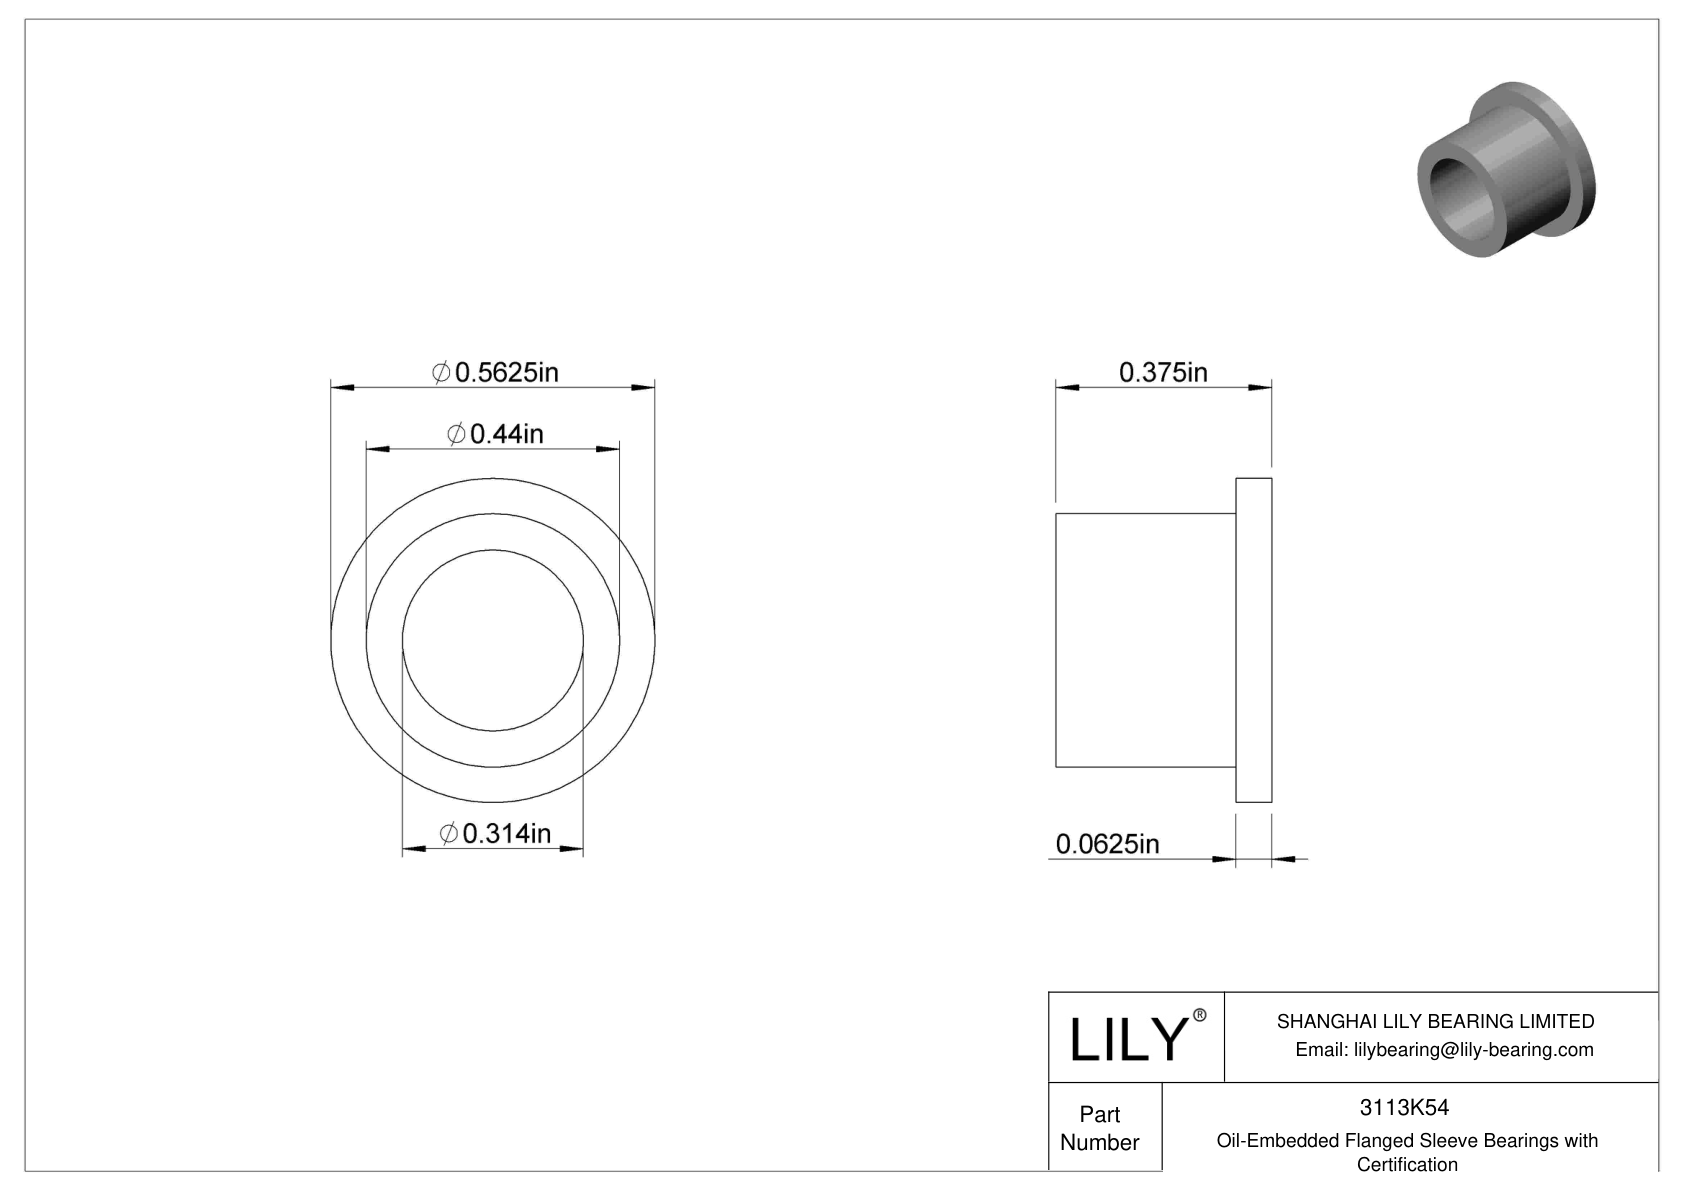 DBBDKFE Oil-Embedded Flanged Sleeve Bearings with Certification cad drawing